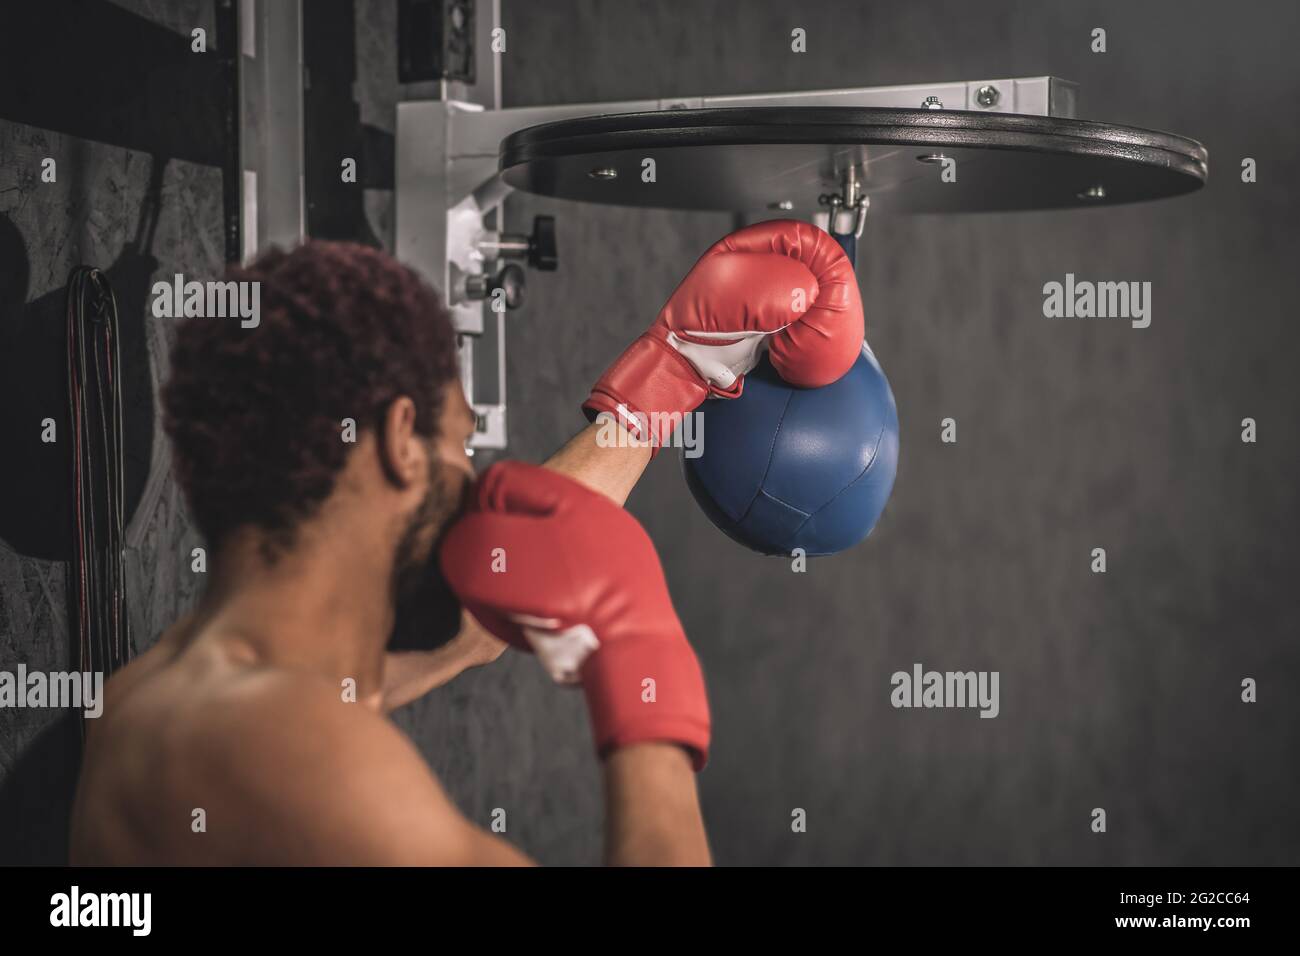 African american kickboxer exercising in a gym working on his kicks Stock Photo